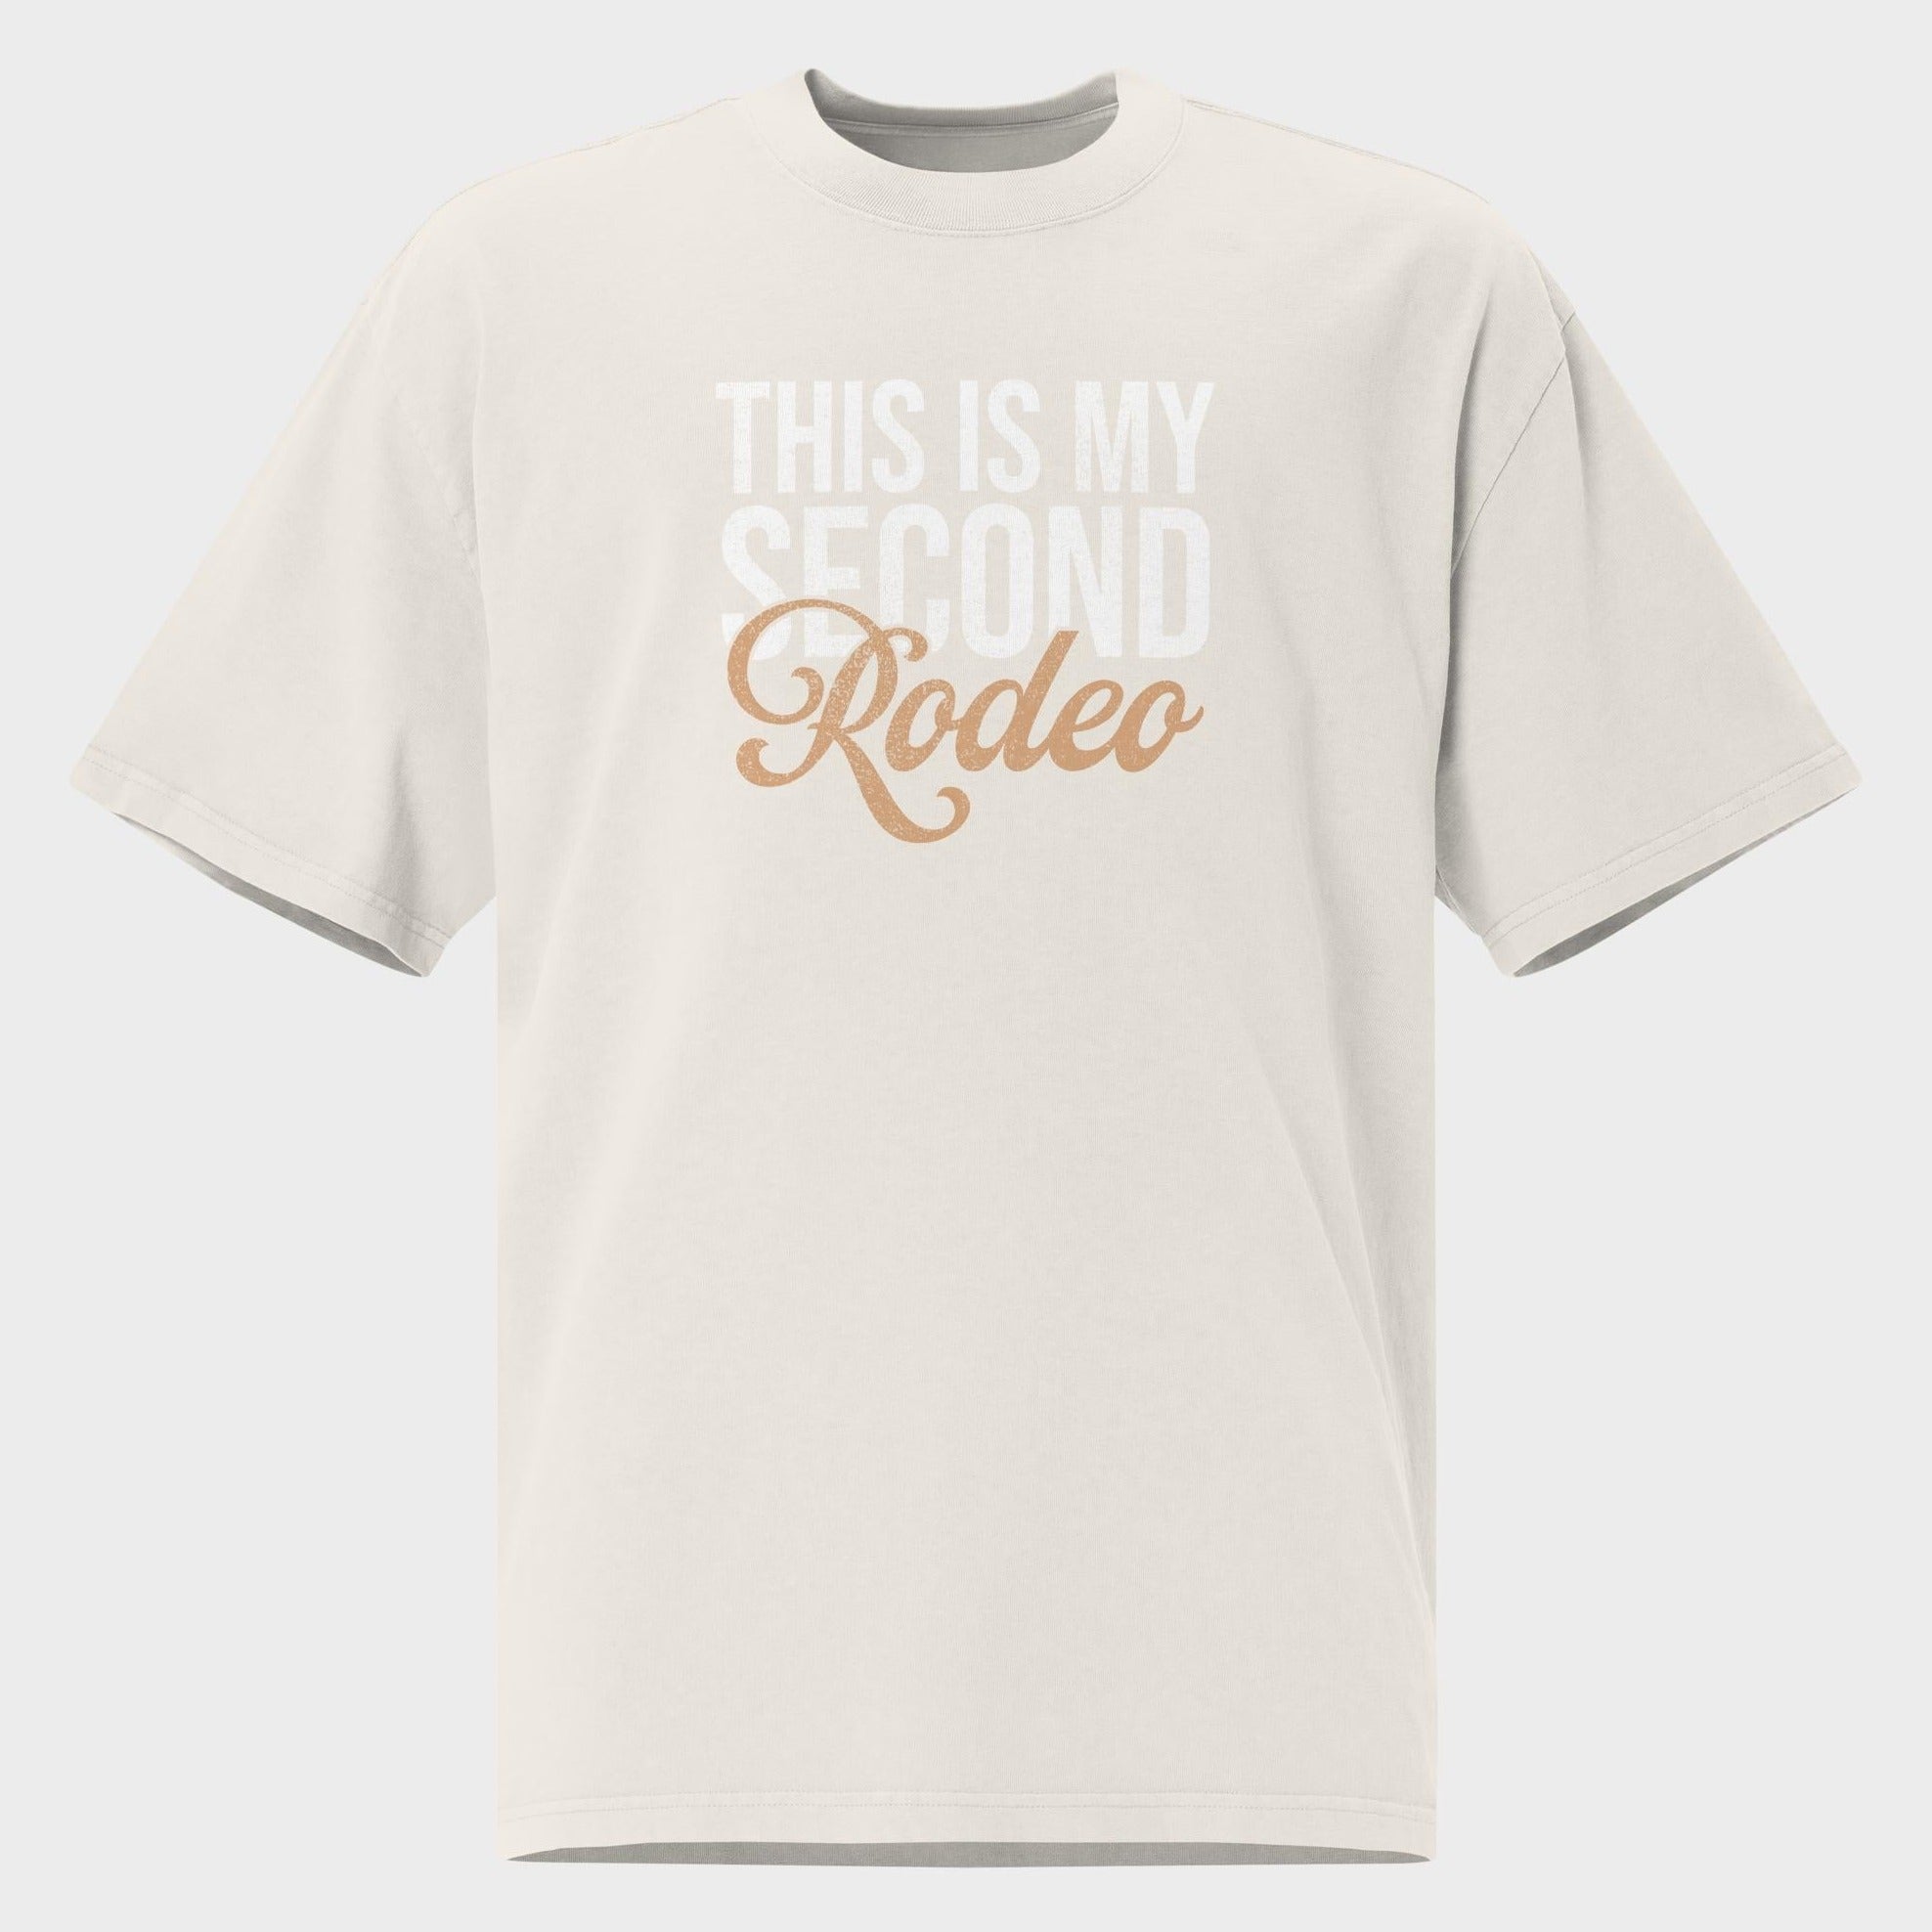 This Is My Second Rodeo - Oversized T-Shirt